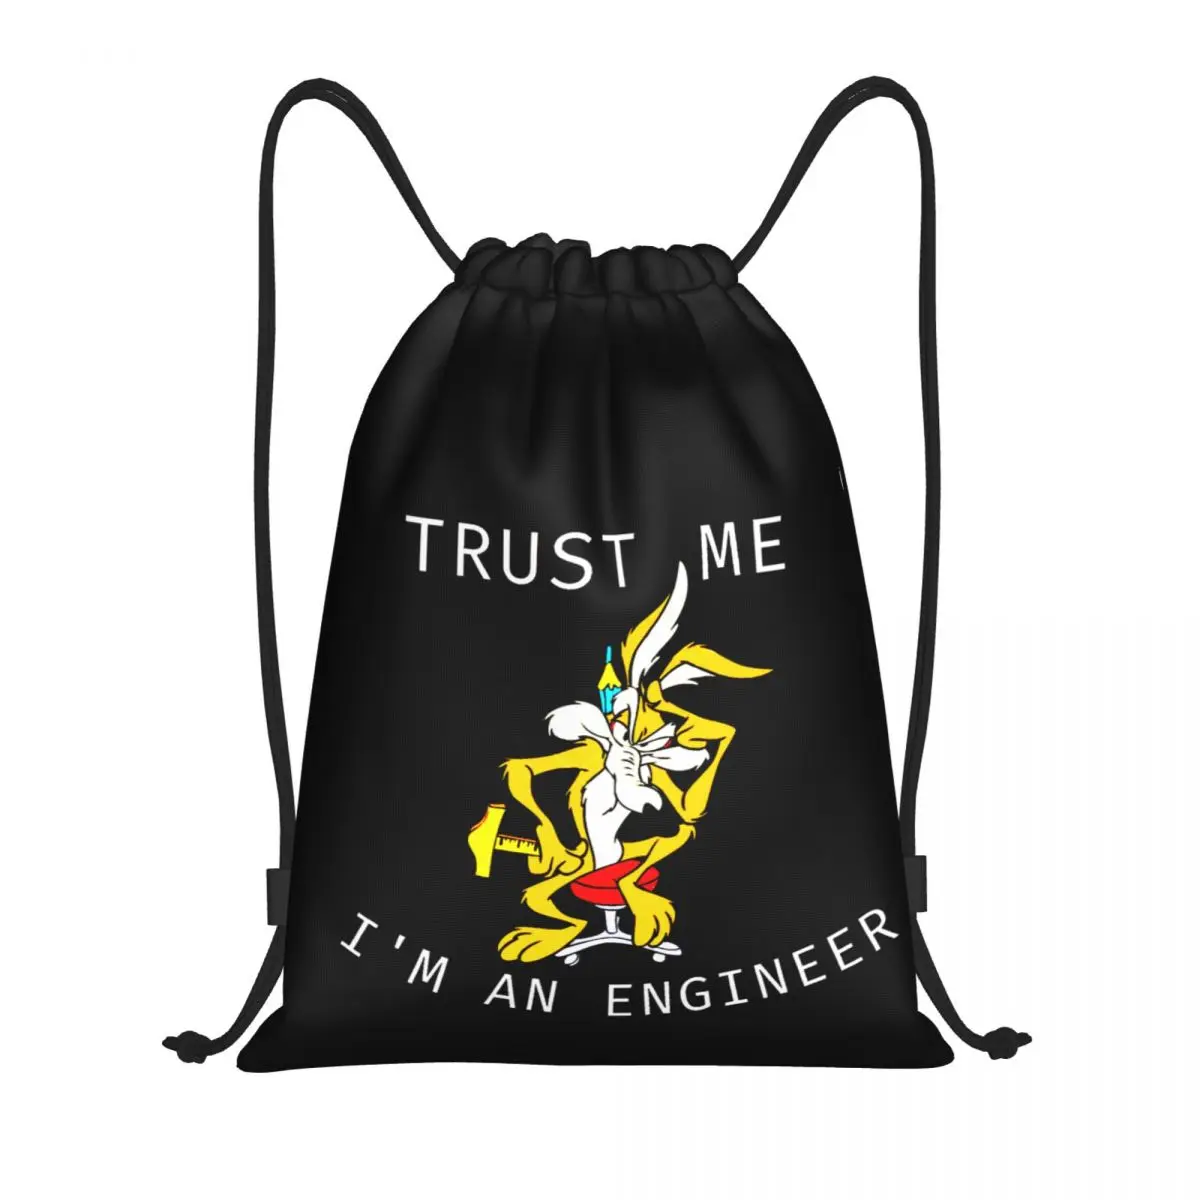 

Trust Me Im An Engineer 14 Drawstring Bags Gym Bag Hot Sale Drawstring Backpack Modern Firm Backpack Humor Graphic